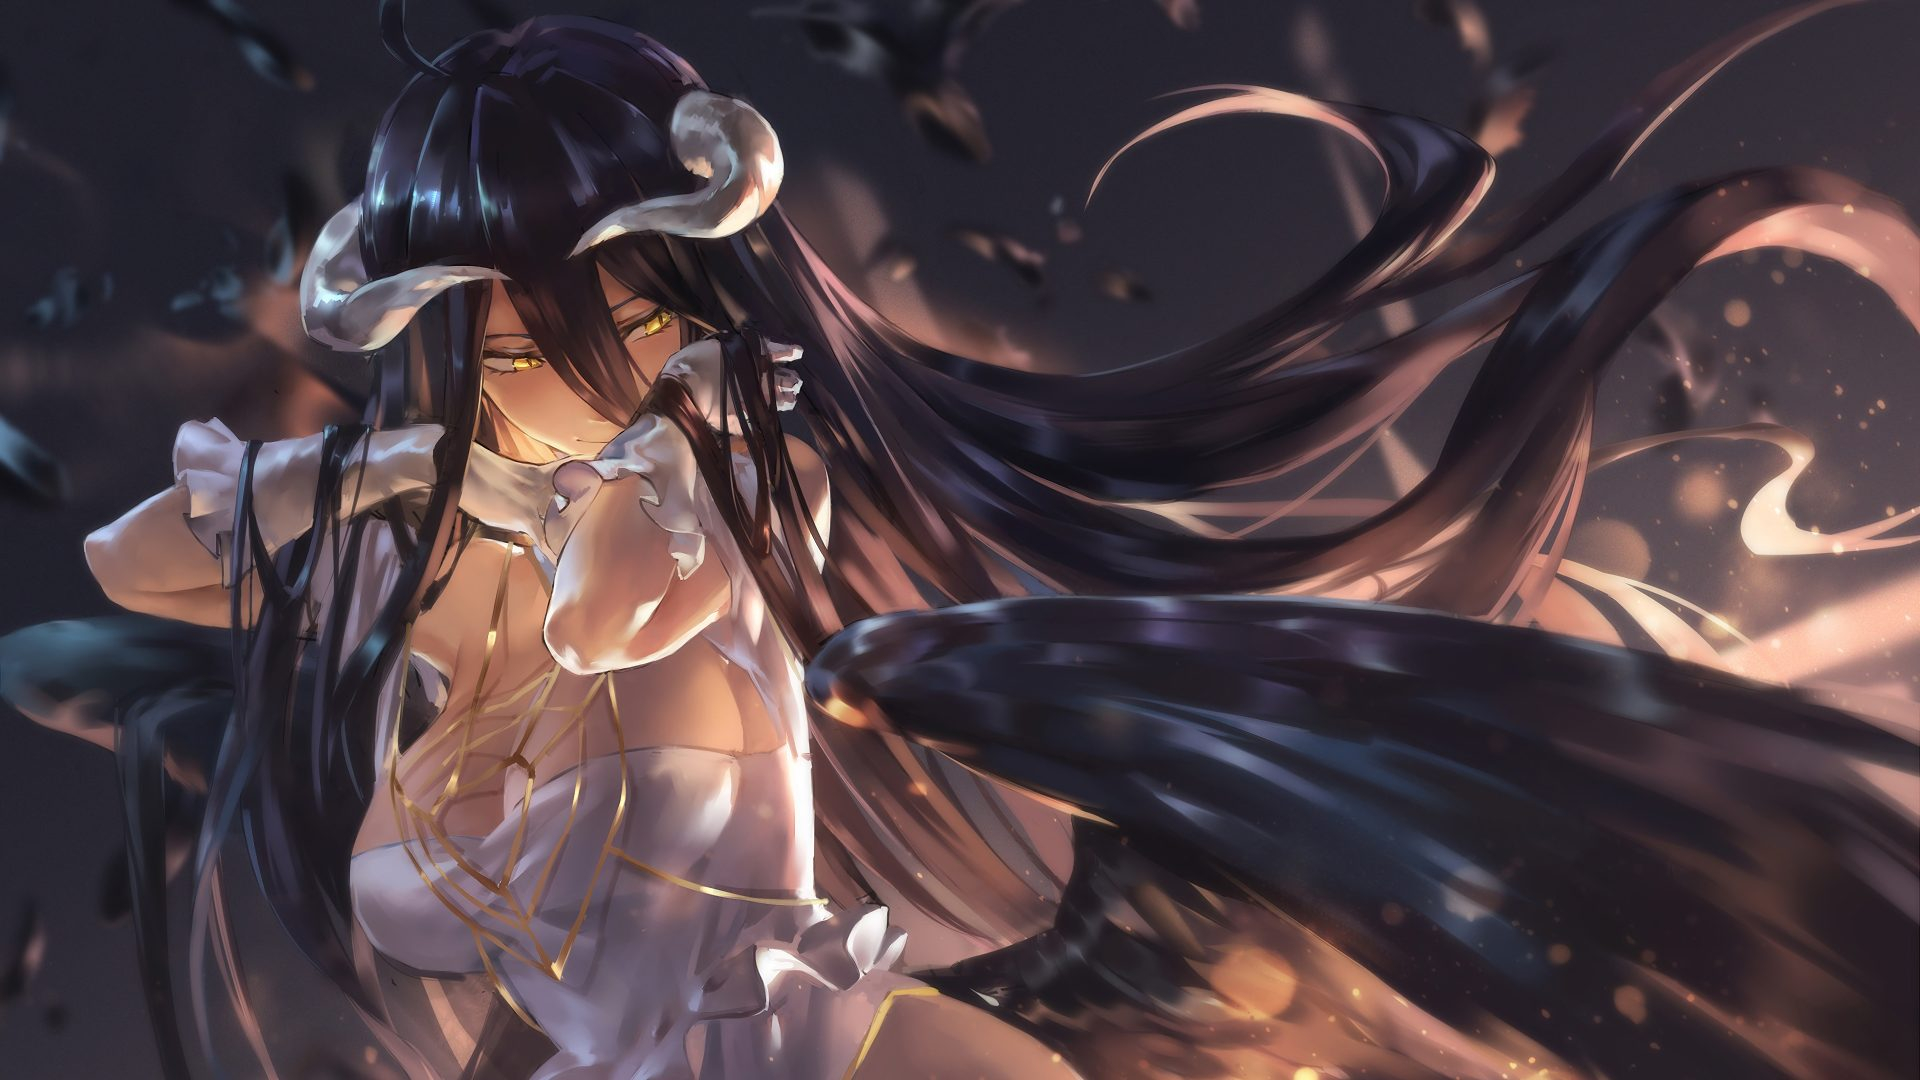 1920x1080 Is Albedo A Traitor In Overlord